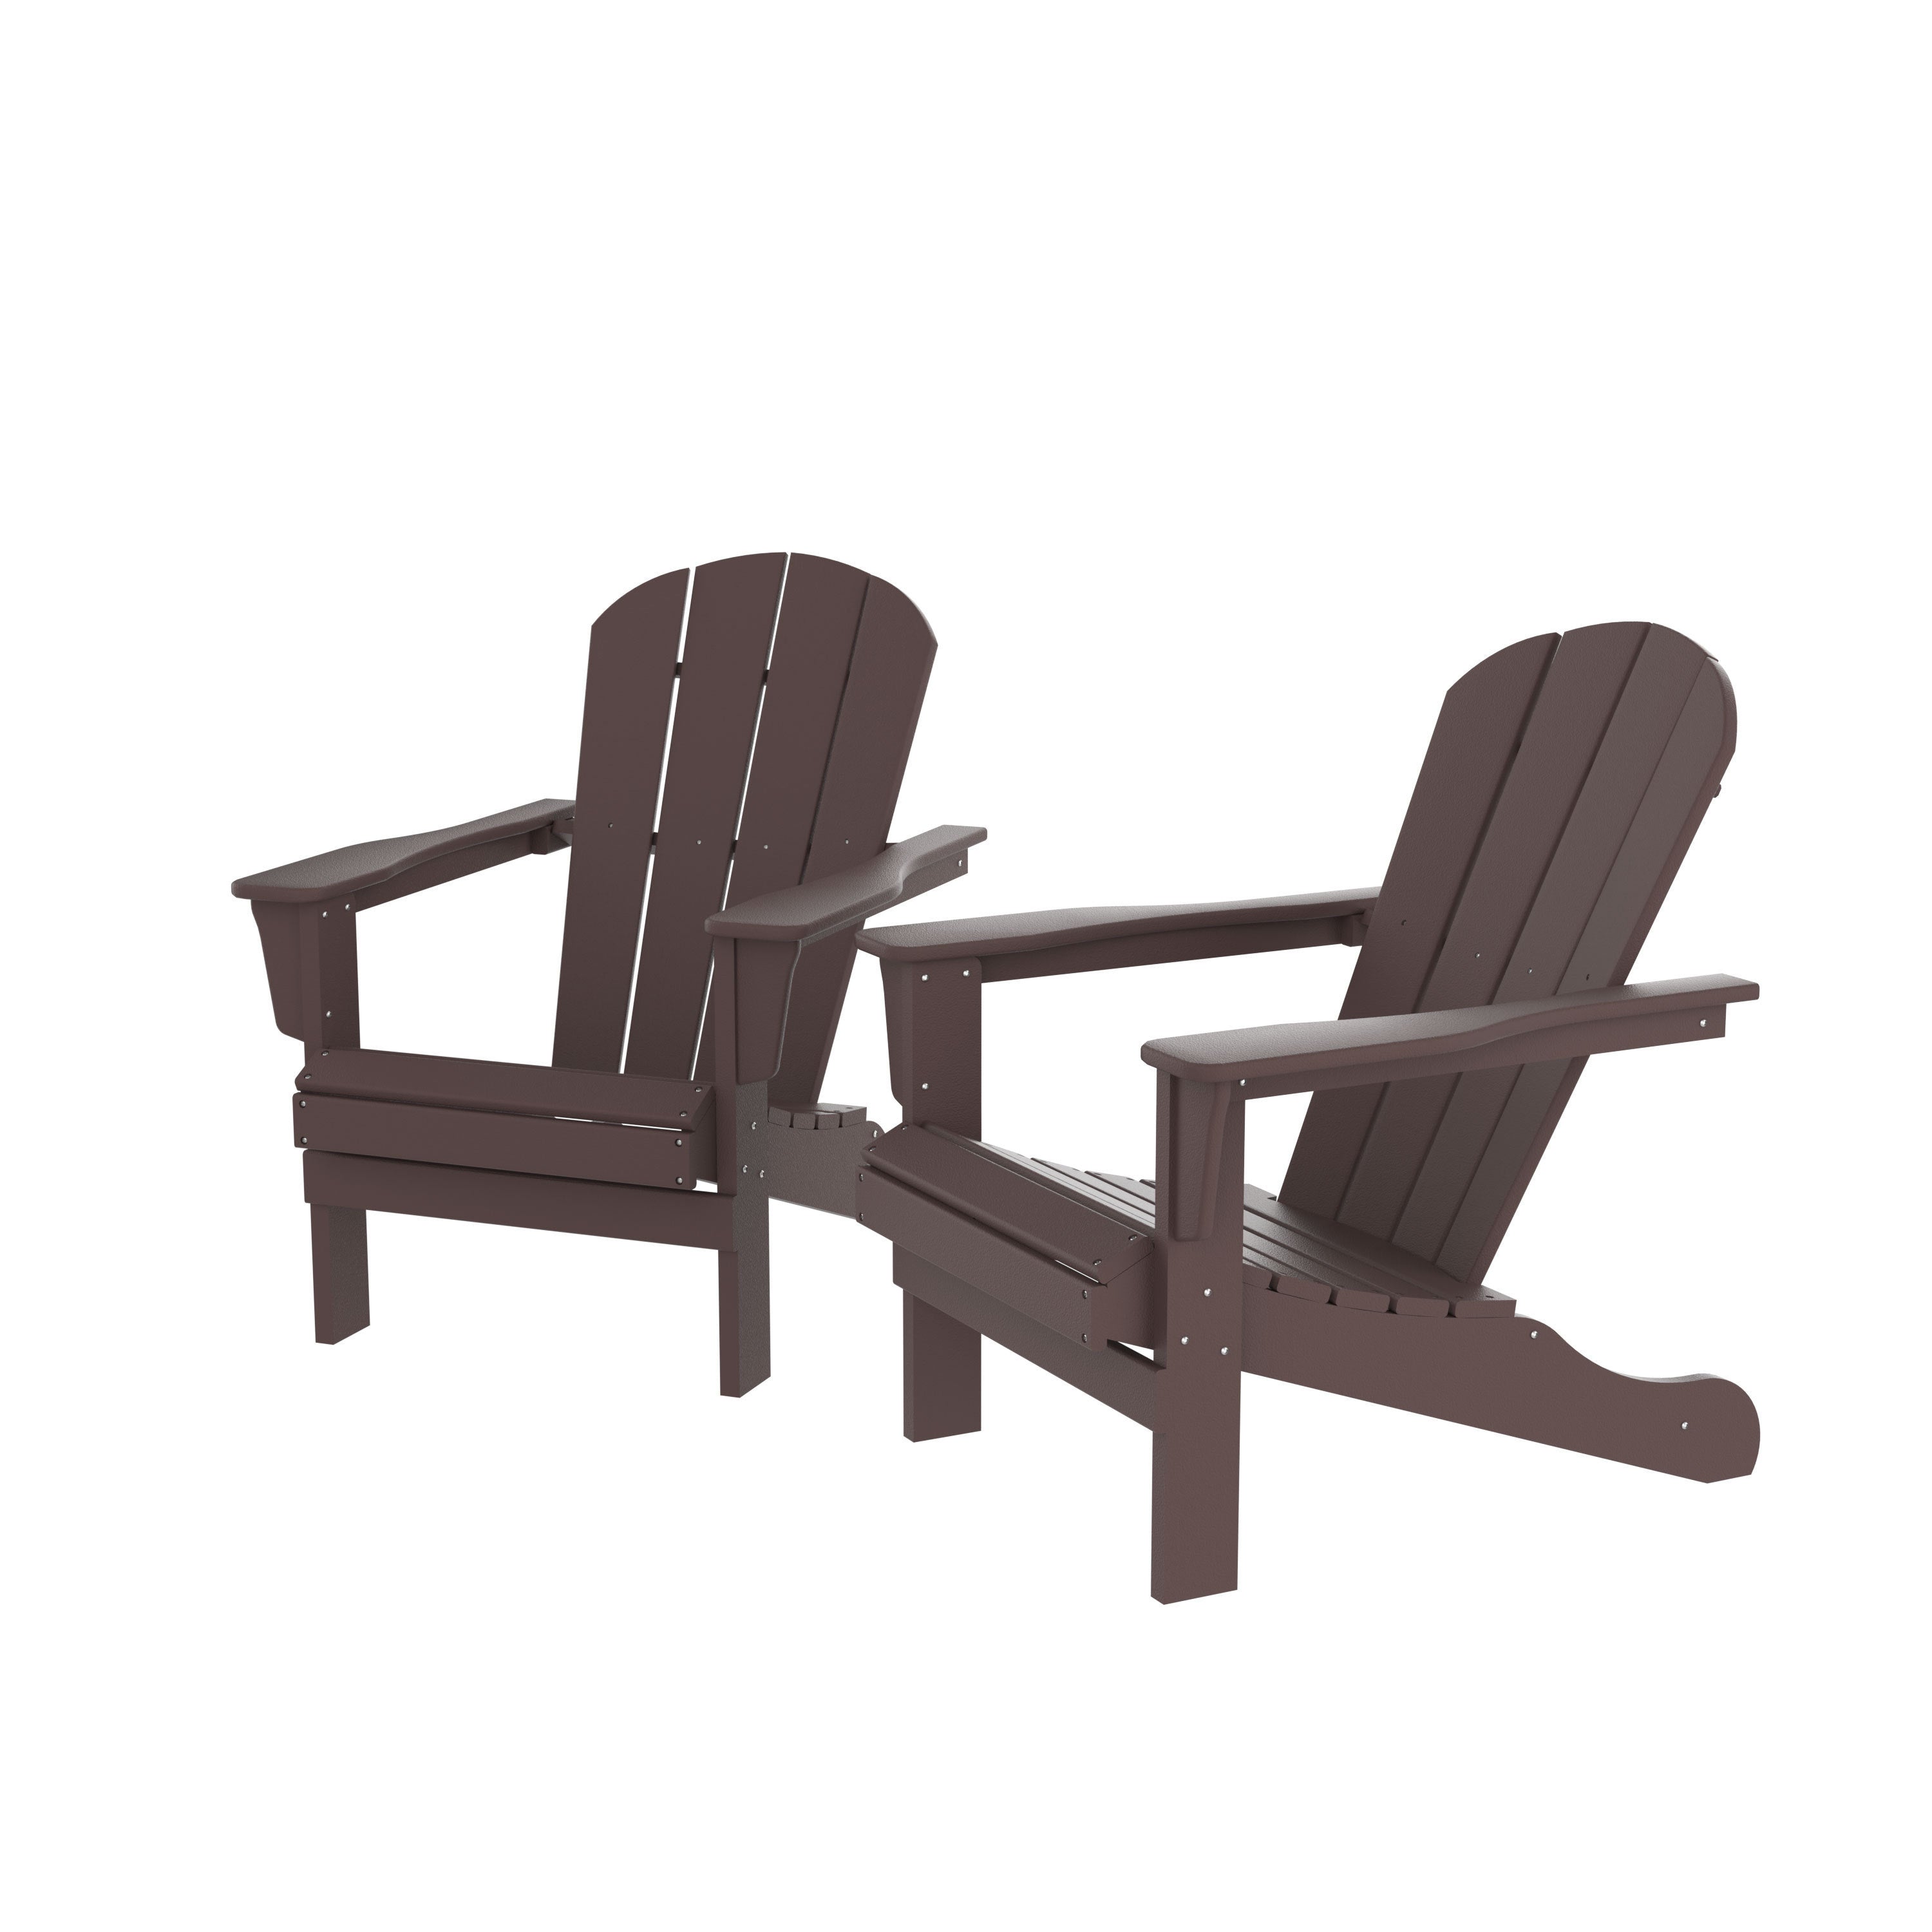 HDPE Adirondack Chair Terrace Outdoor Chair Set of 2 (Brown)